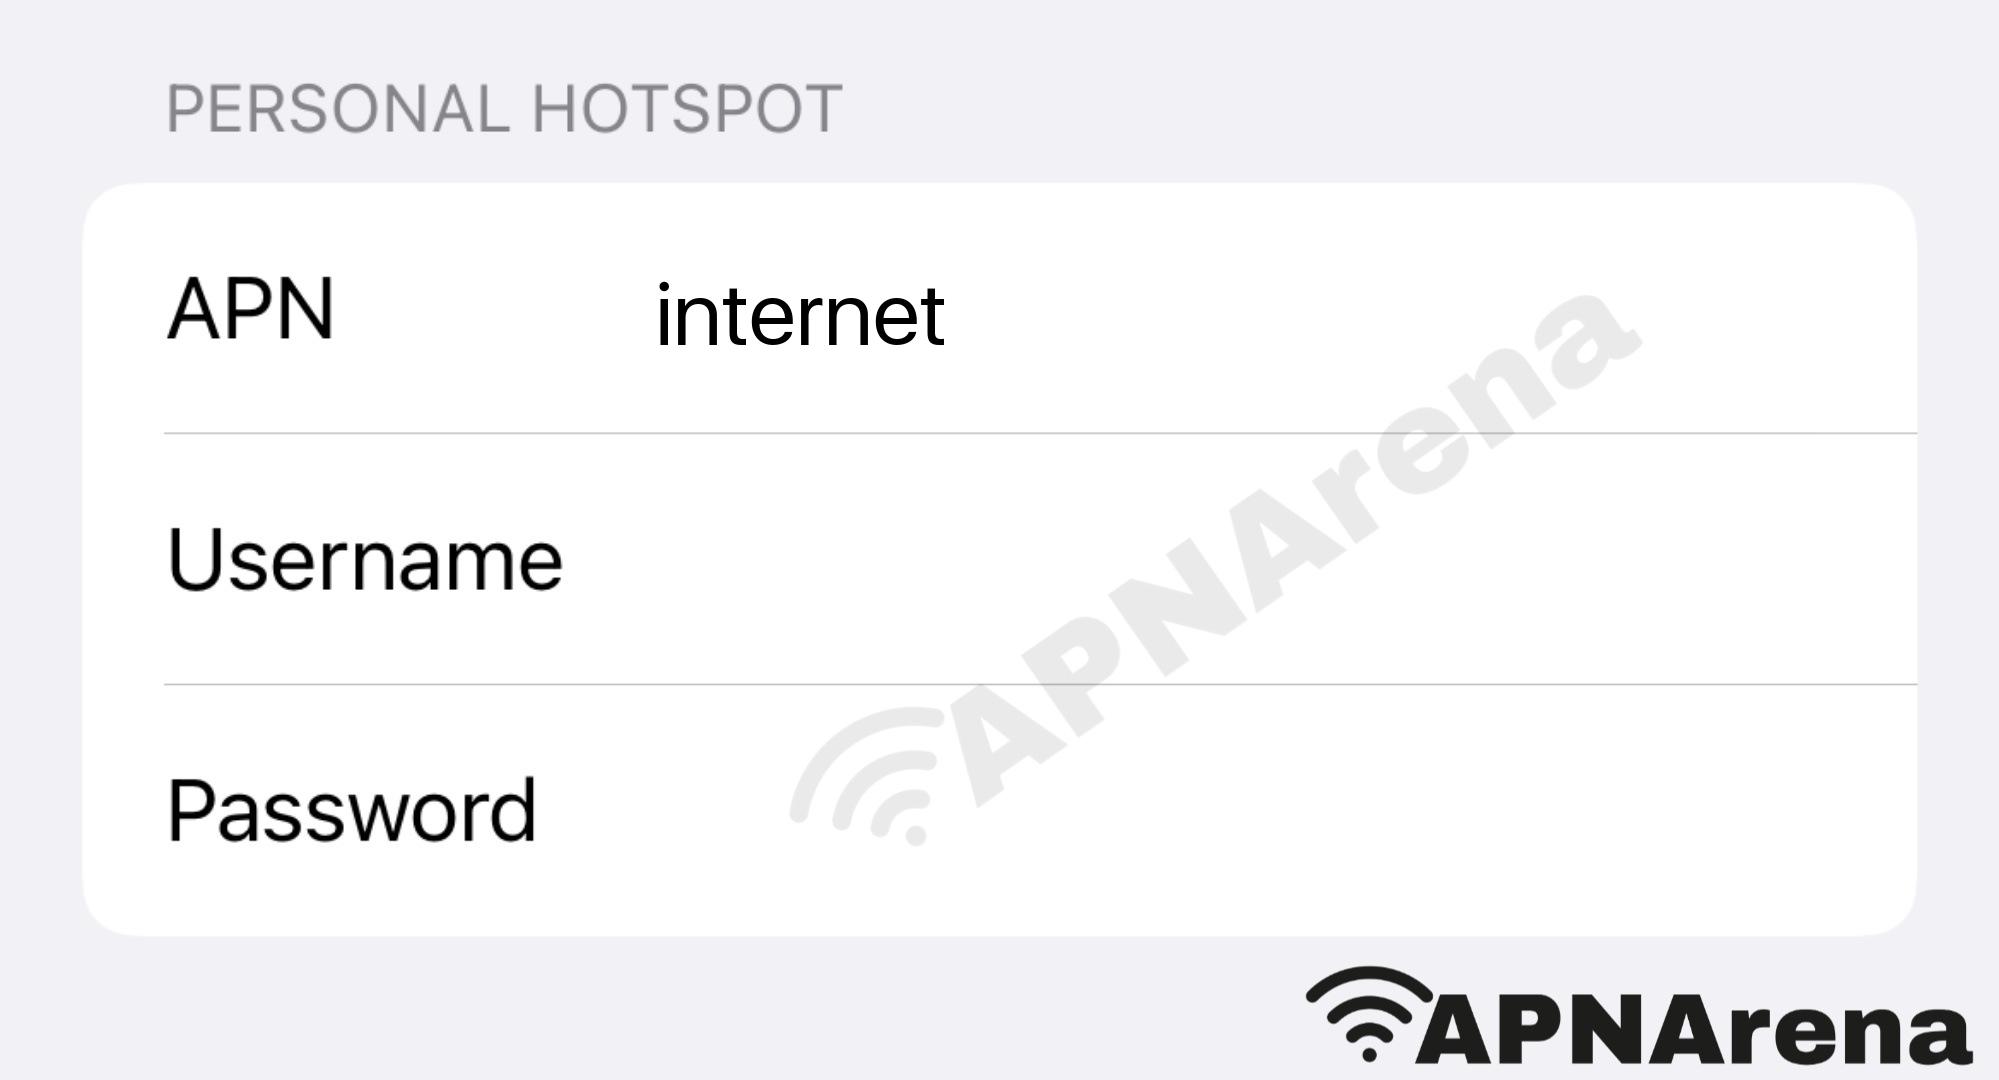 C4C Mobile Personal Hotspot Settings for iPhone